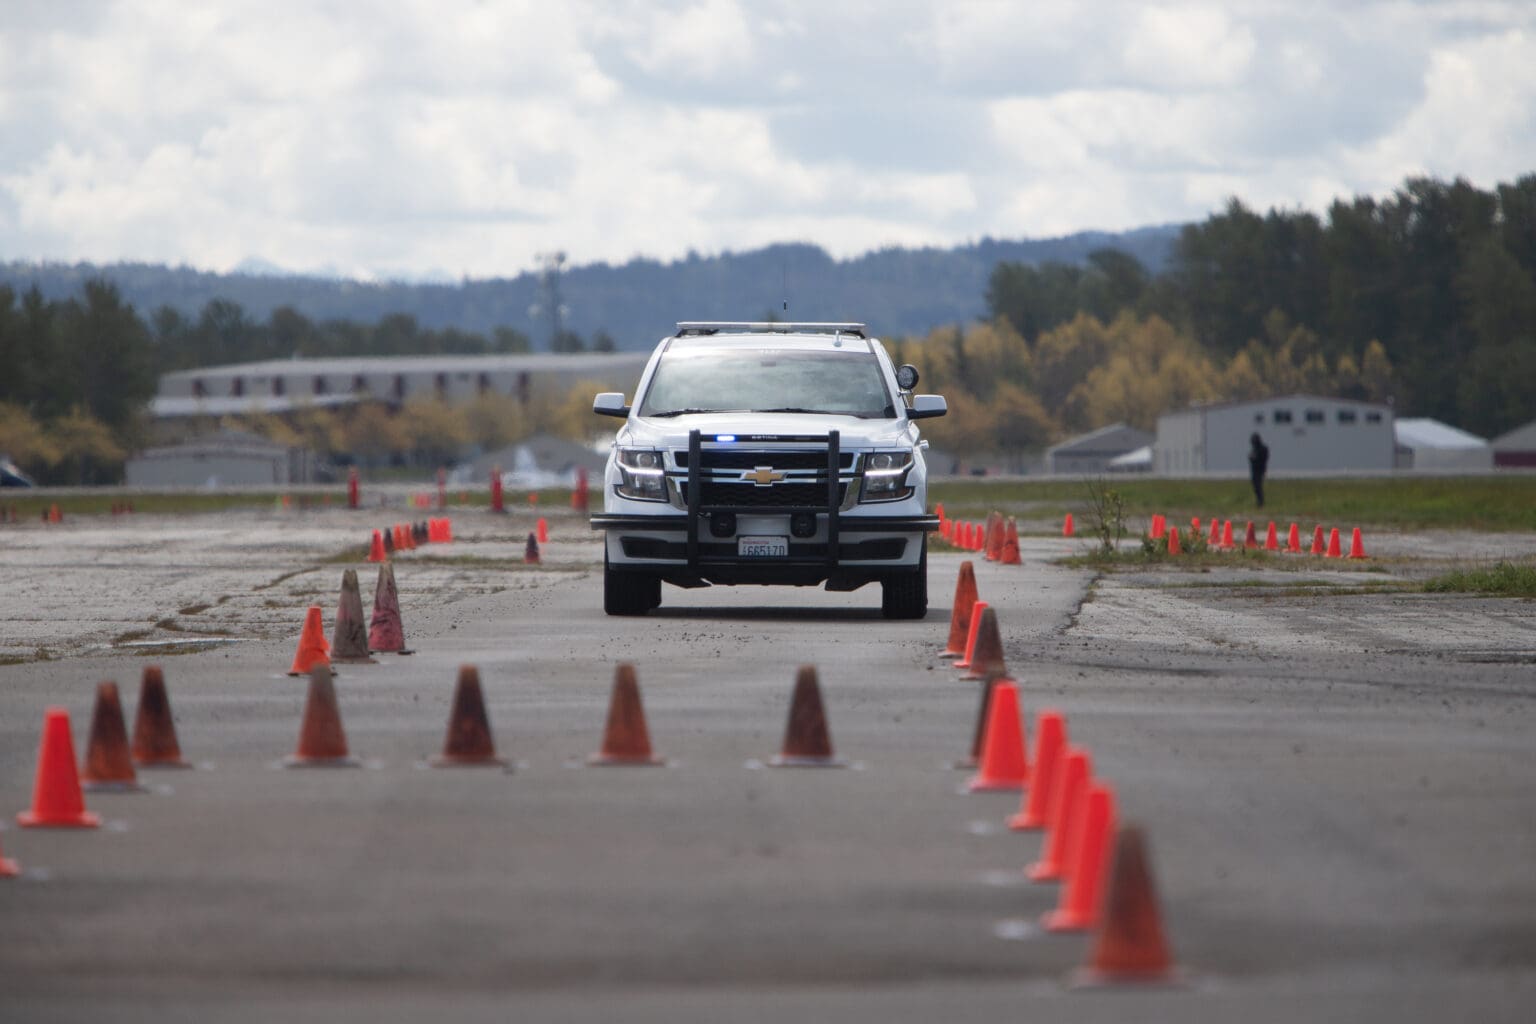 A Bellingham Police Department vehicle navigates a driving course in May 2022. Officers in training must prove themselves physically and psychologically before they join the force